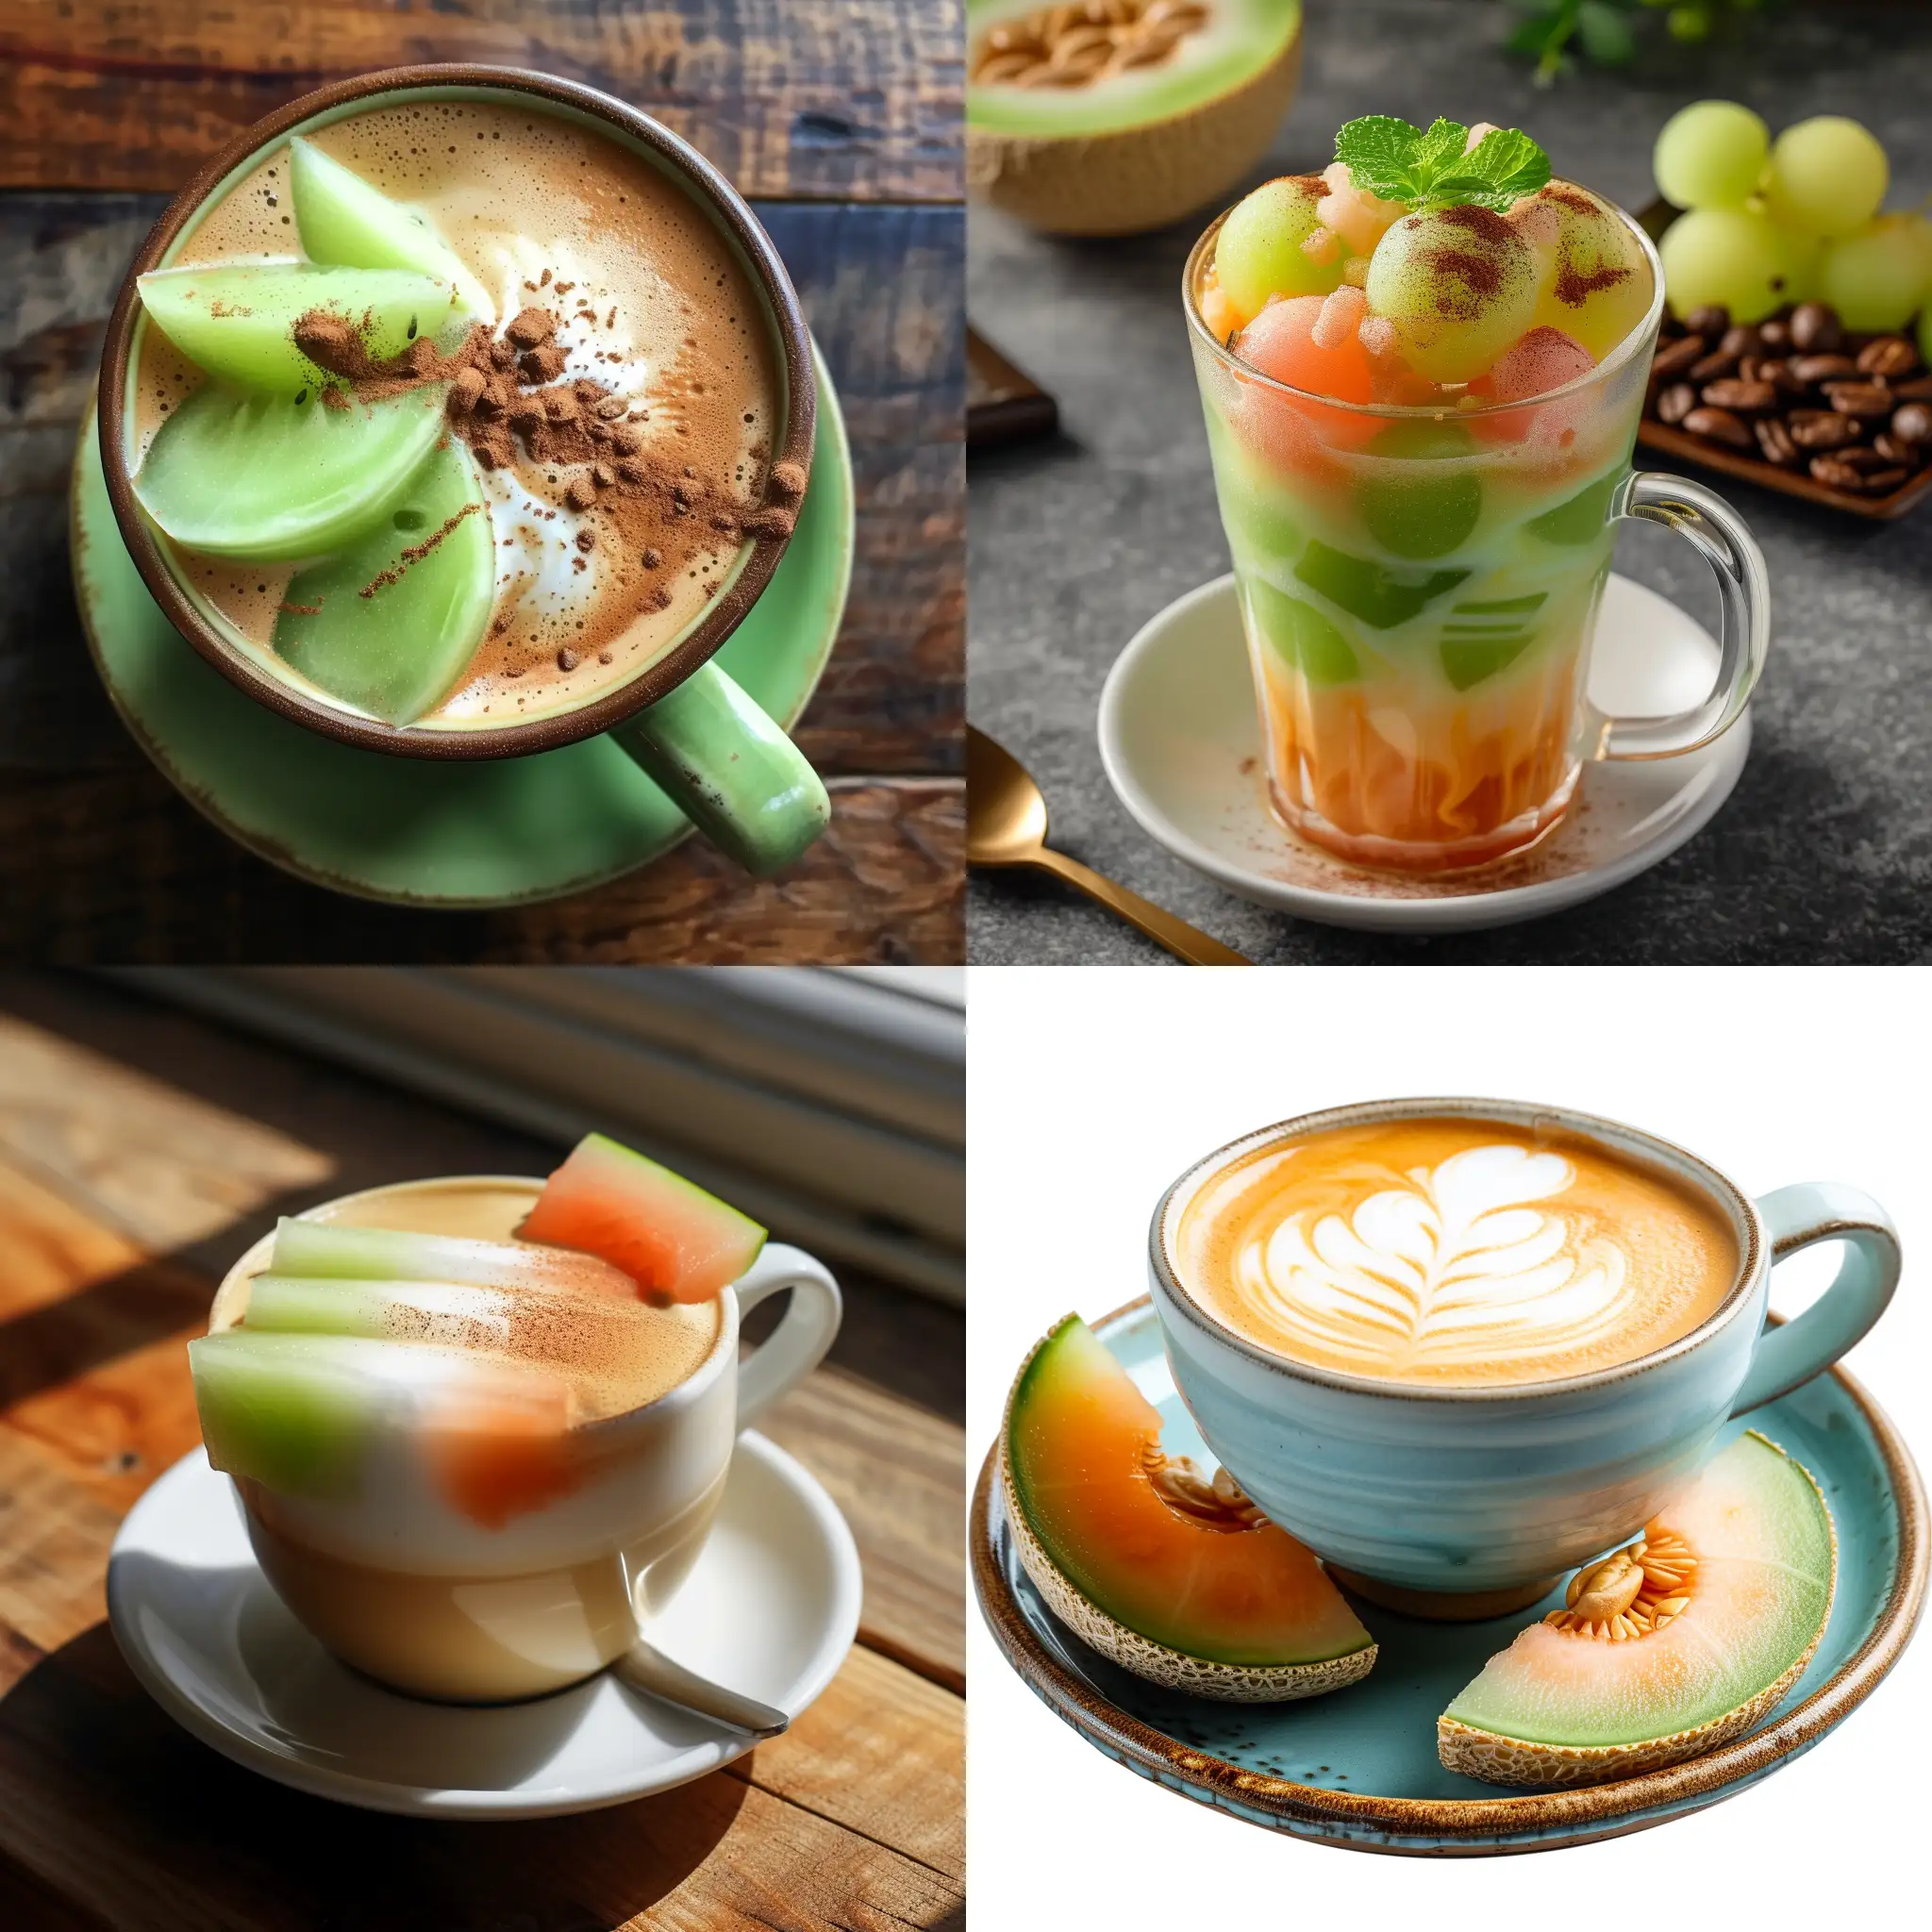 Vibrant-Melon-Coffee-Cup-on-Patterned-Background